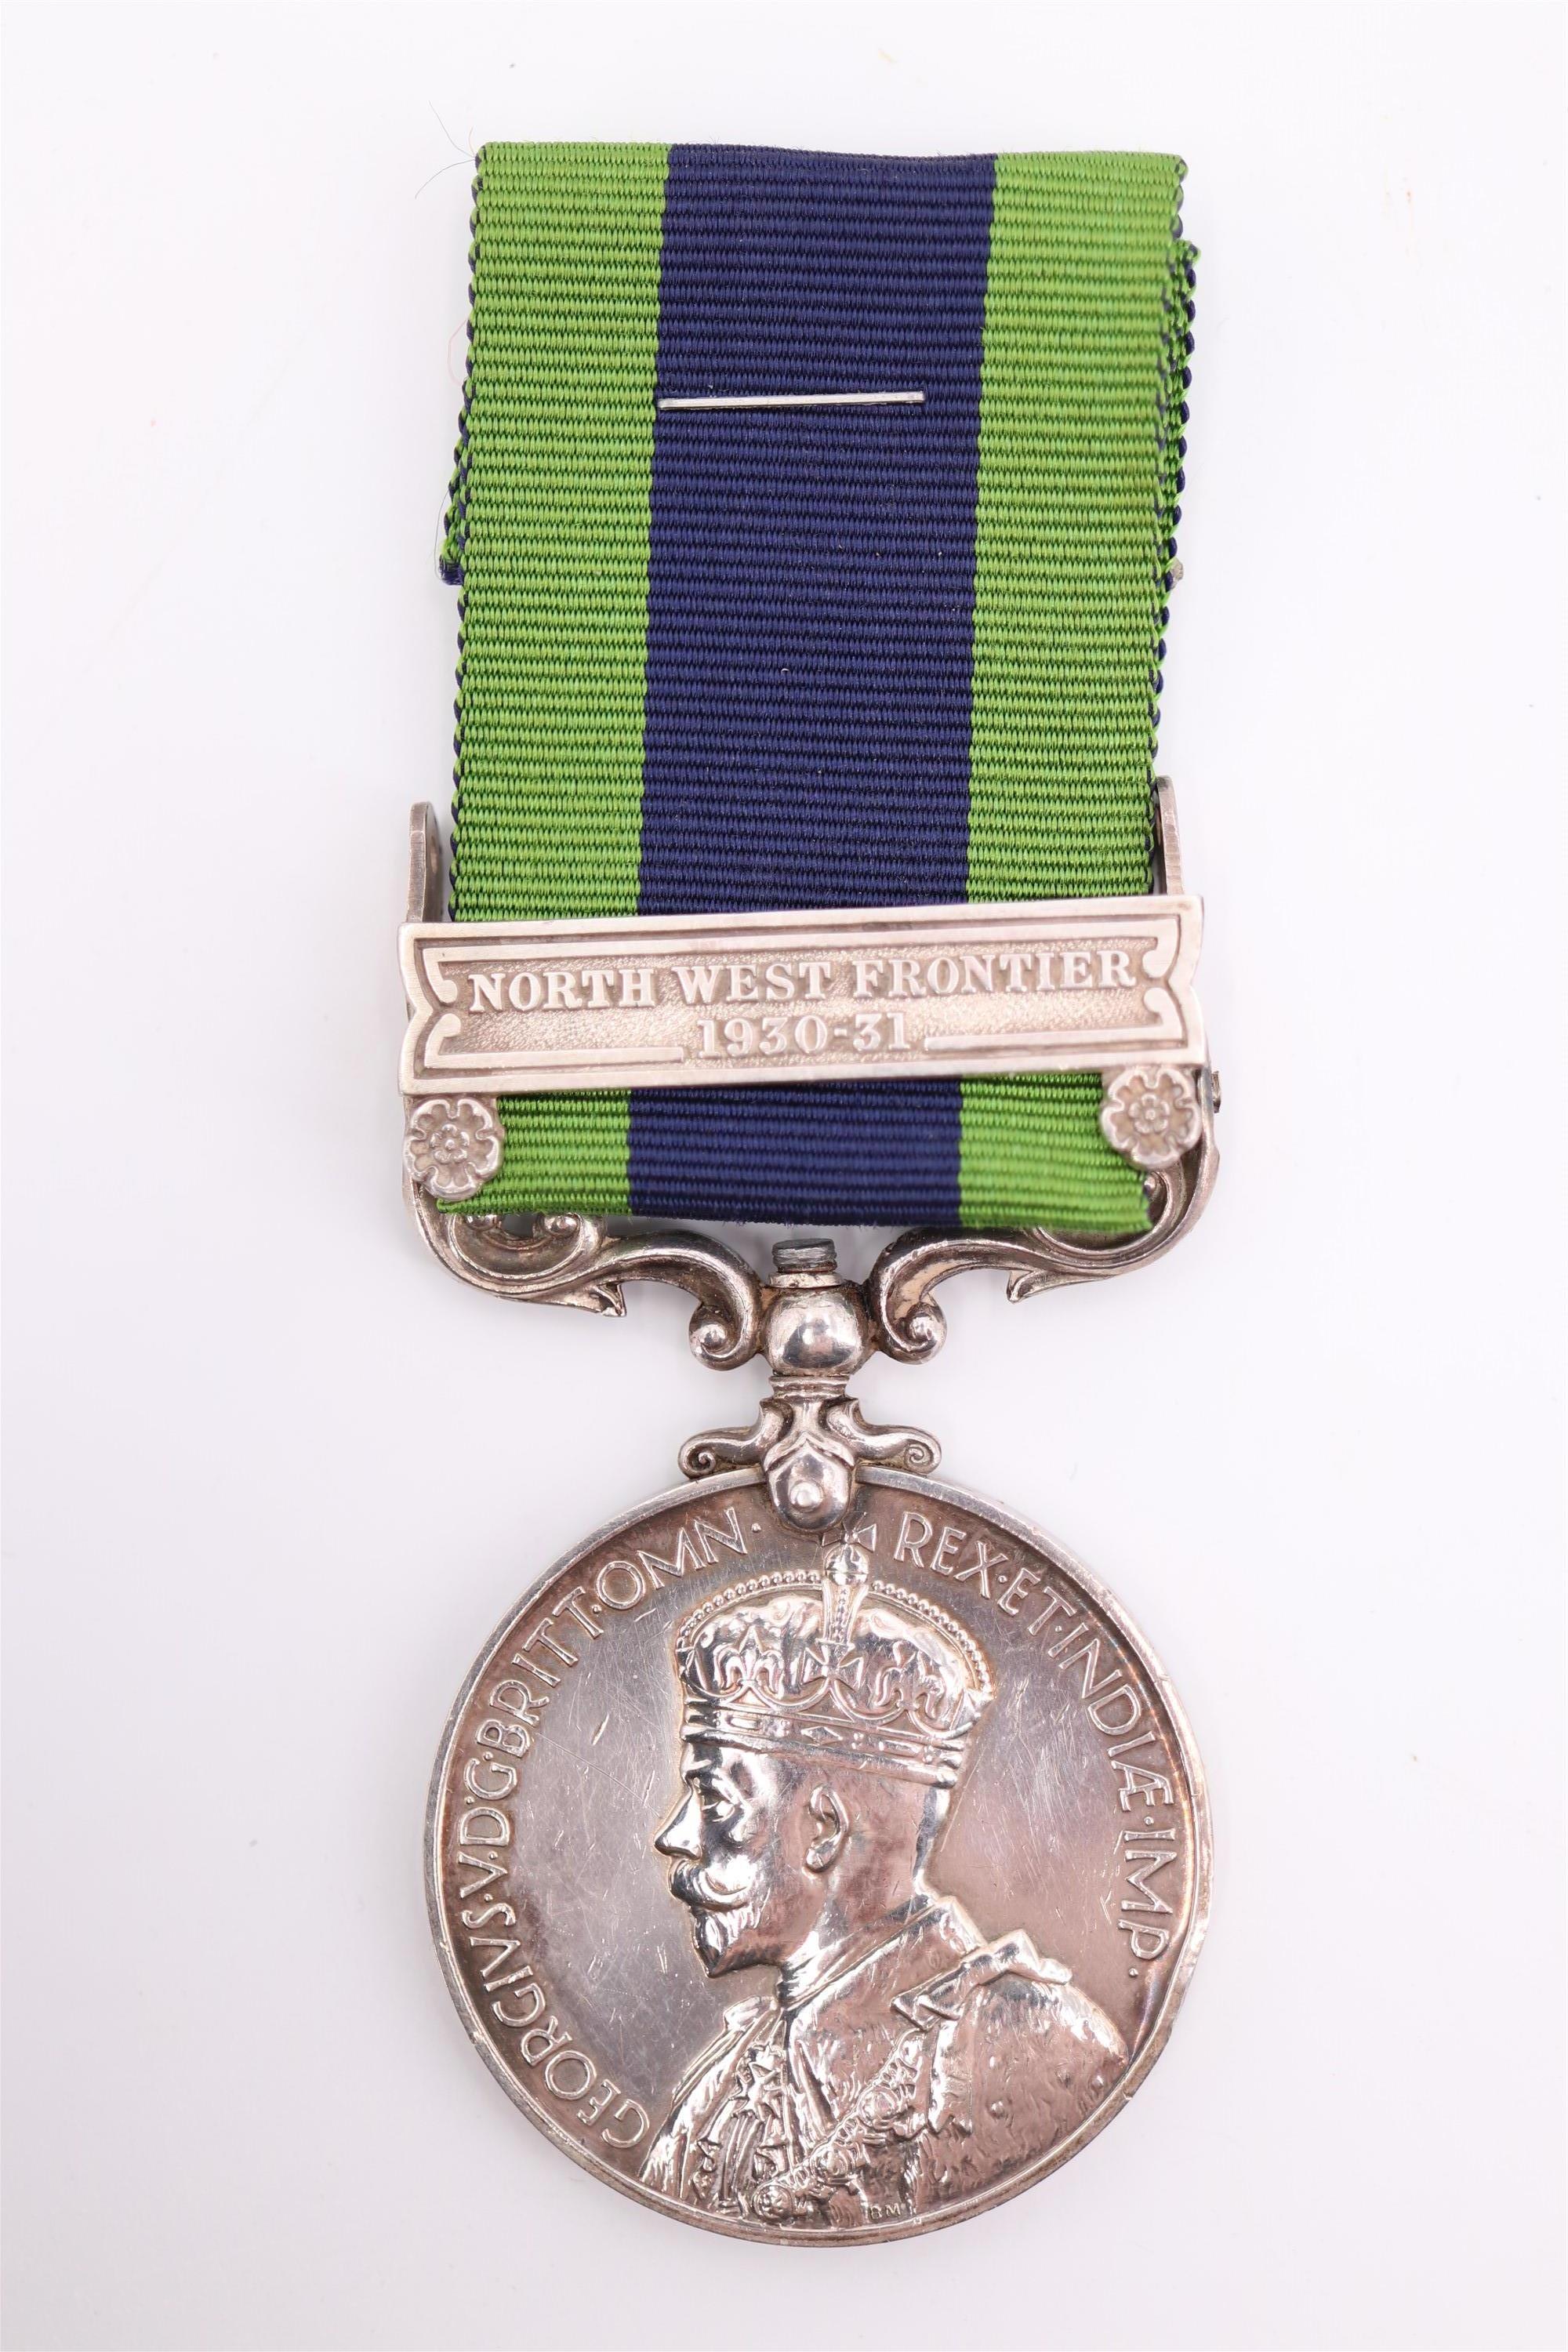 An India General Service Medal with North West Frontier 1930-31 clasp to 3594553 Pte R W